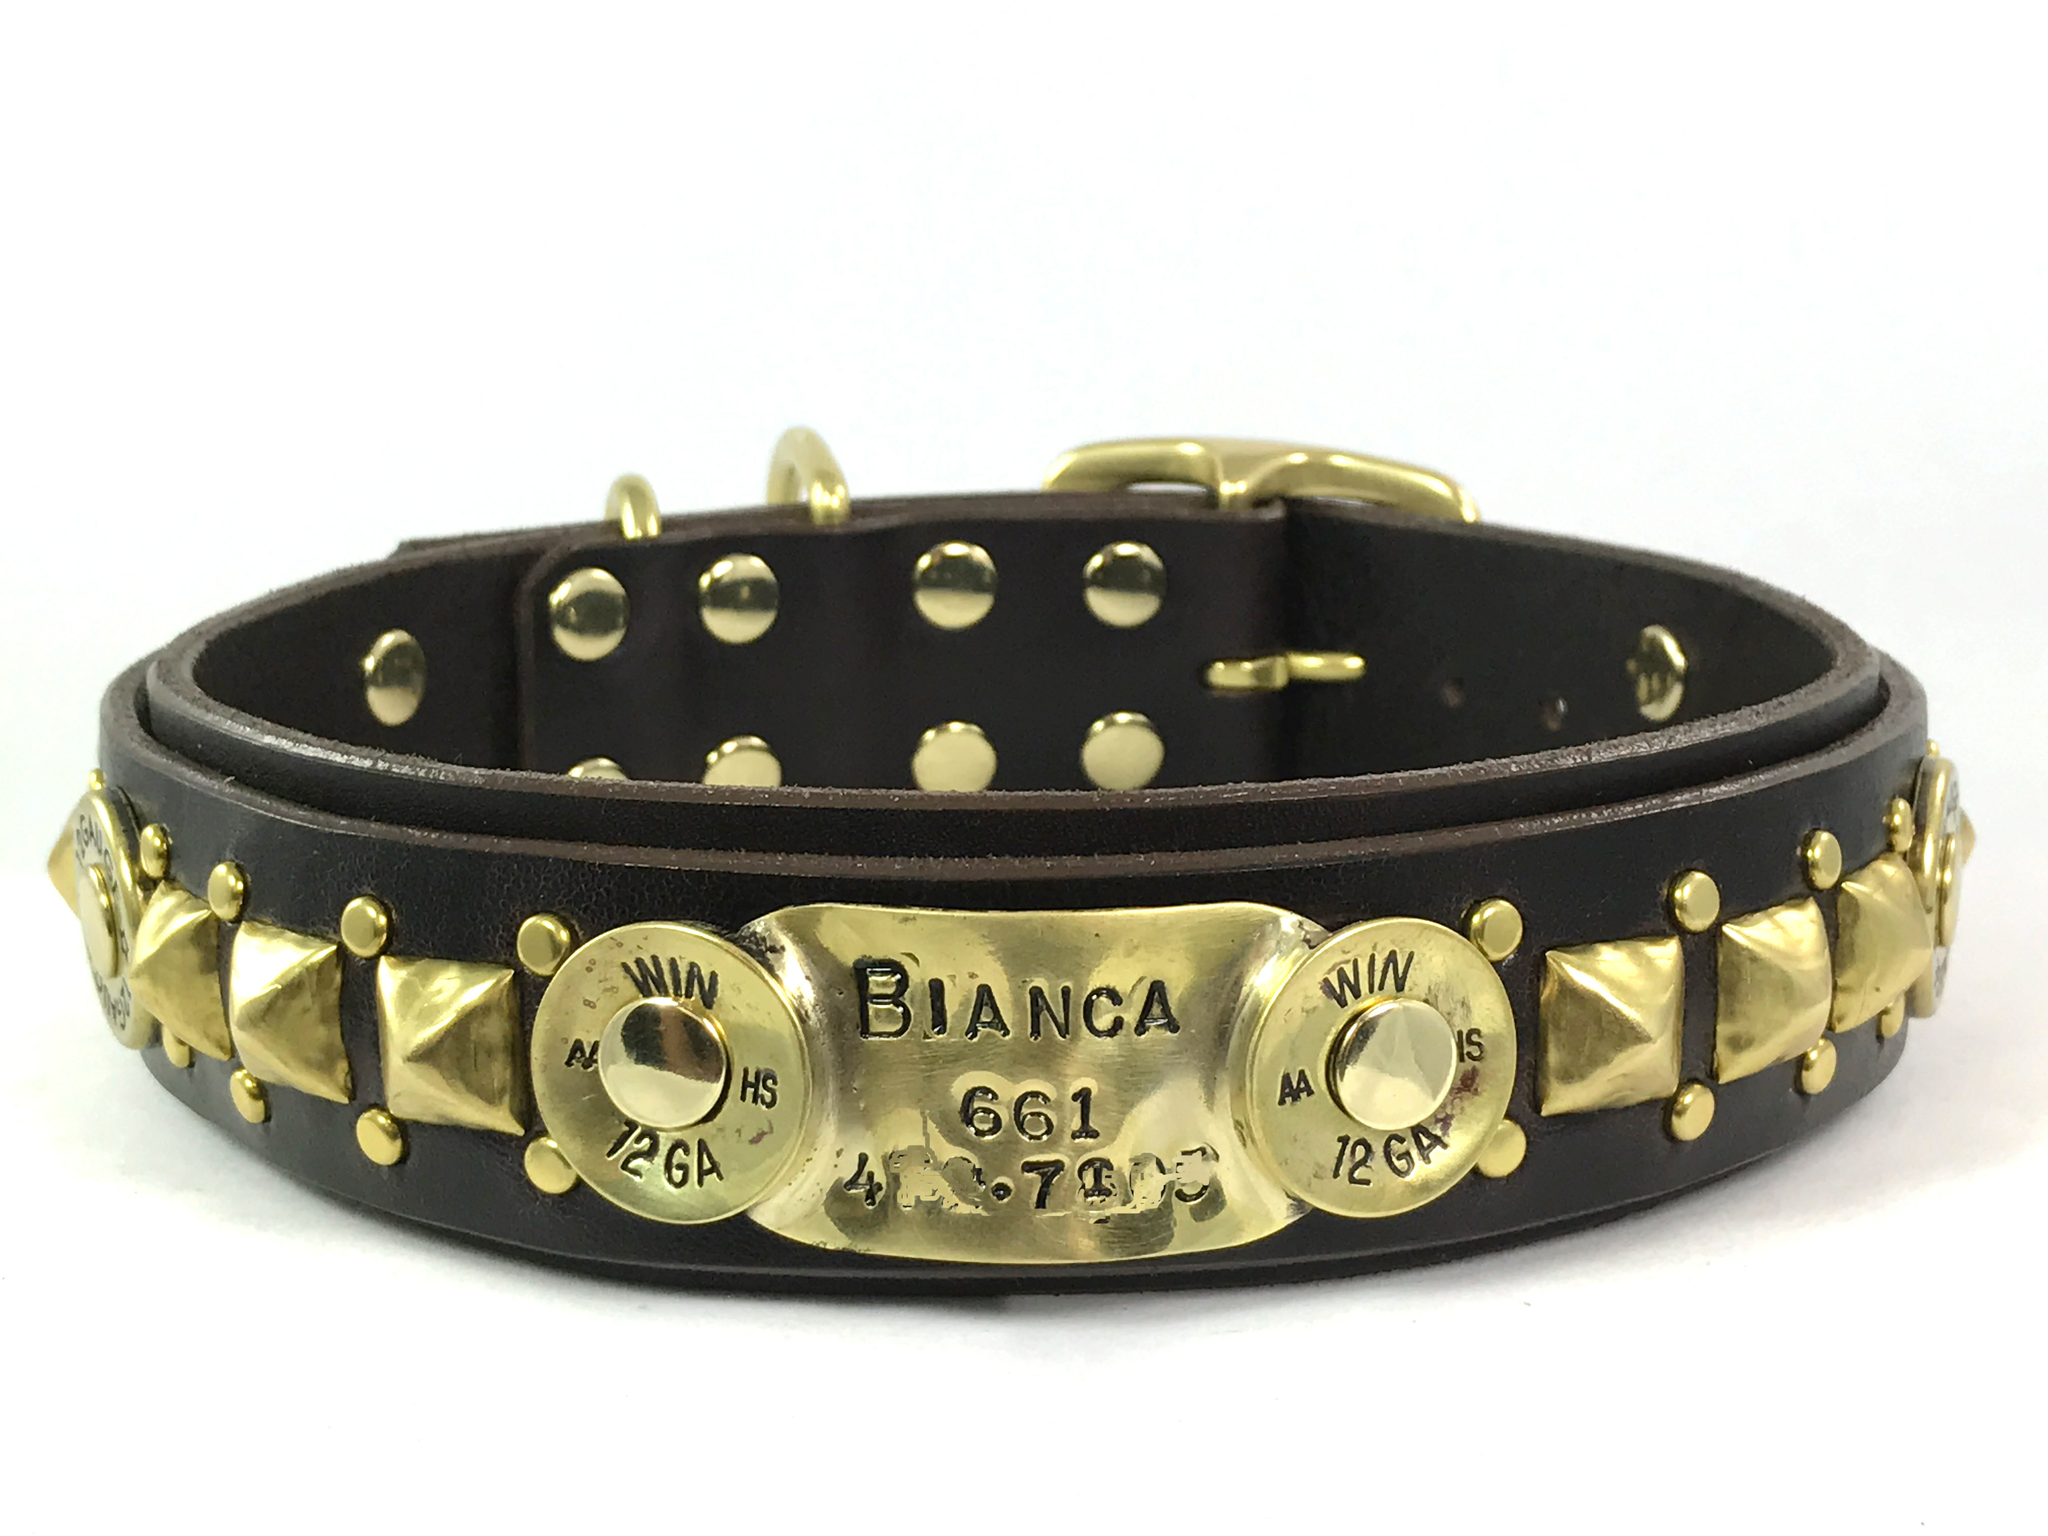 personalized leather dog collars